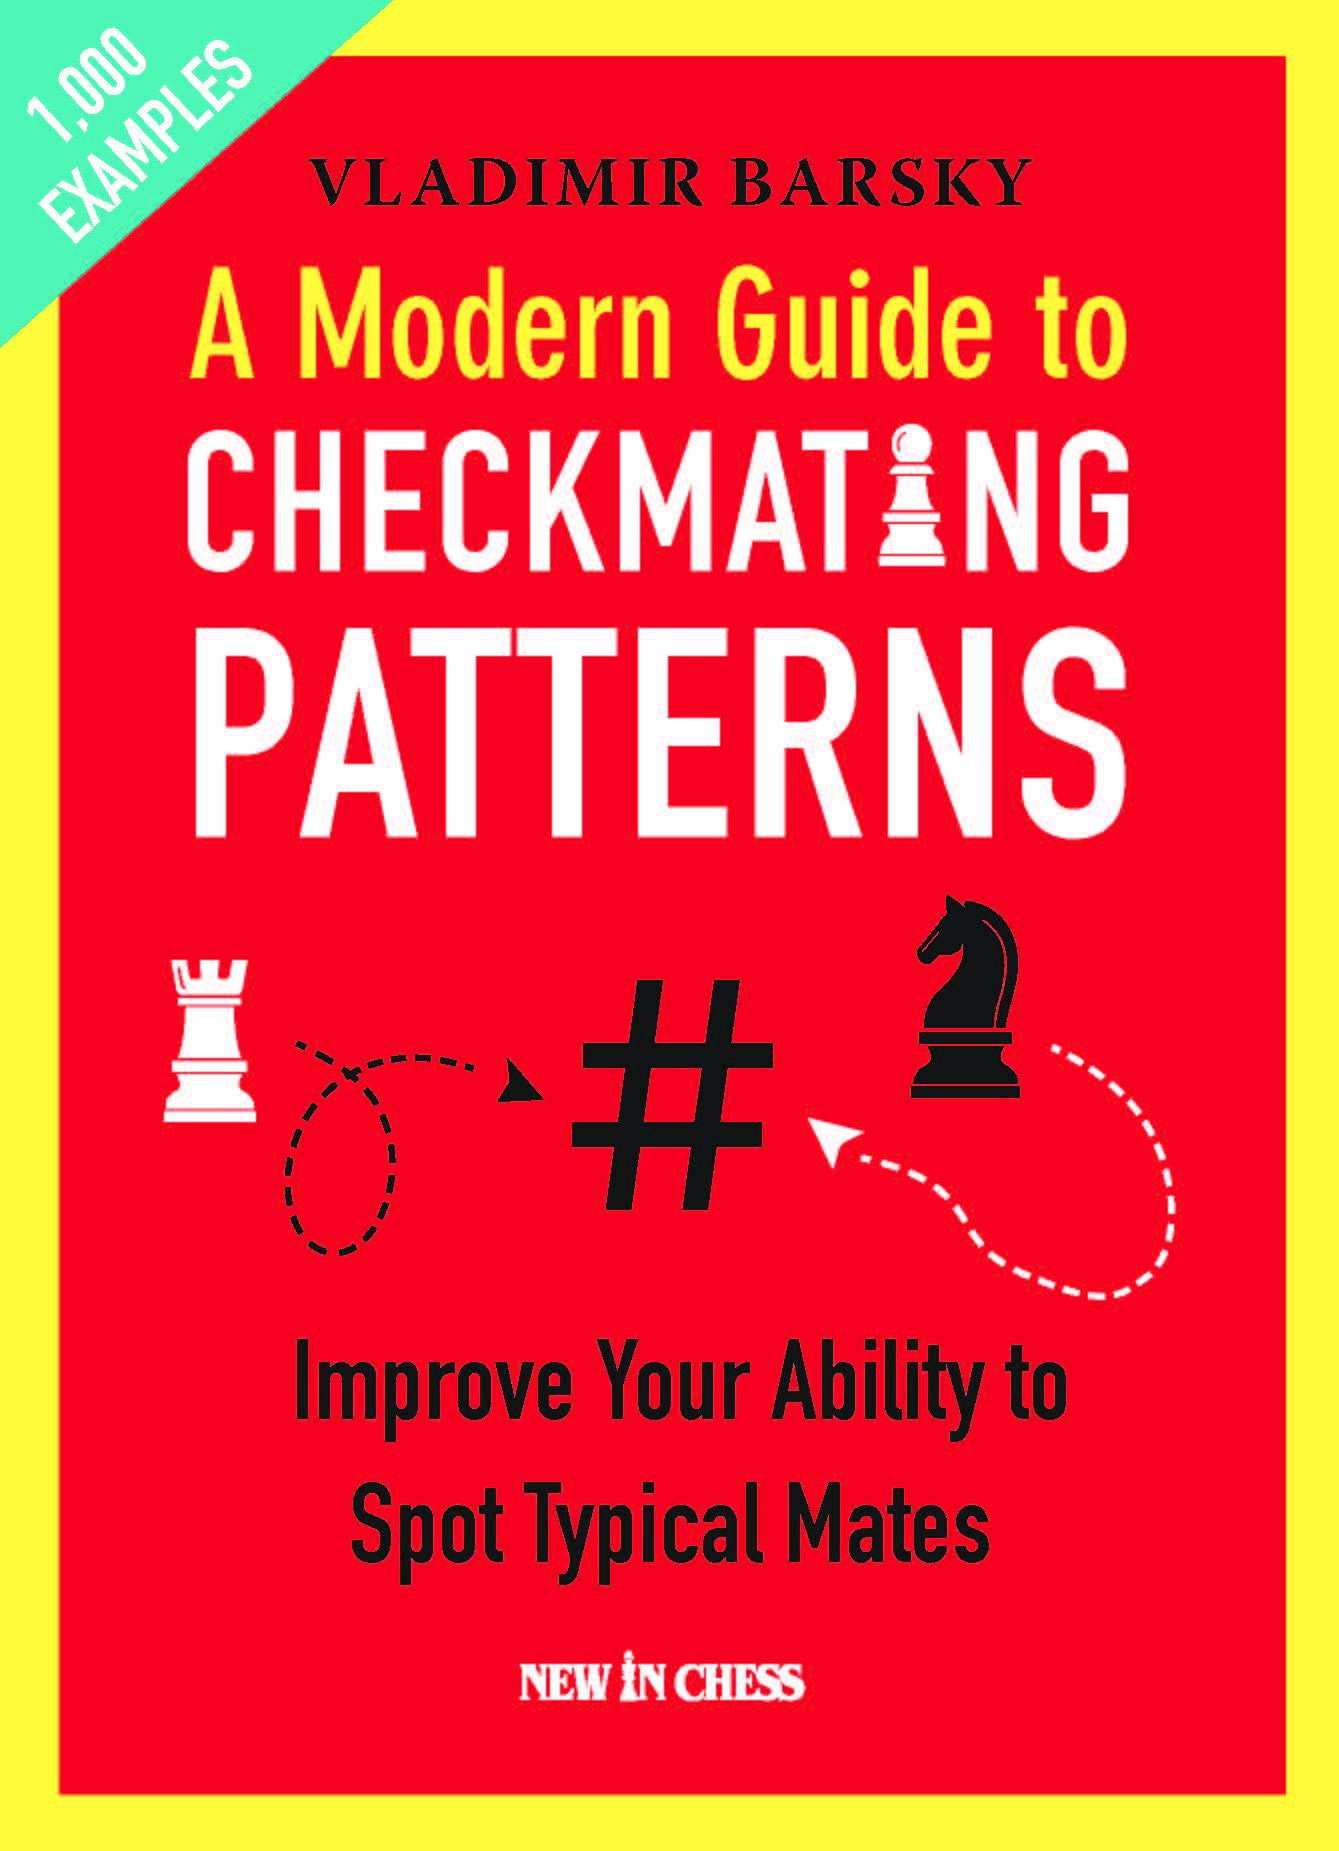 A Modern Guide to Checkmating Patterns, Vladmir Barsky, New in Chess, 2020